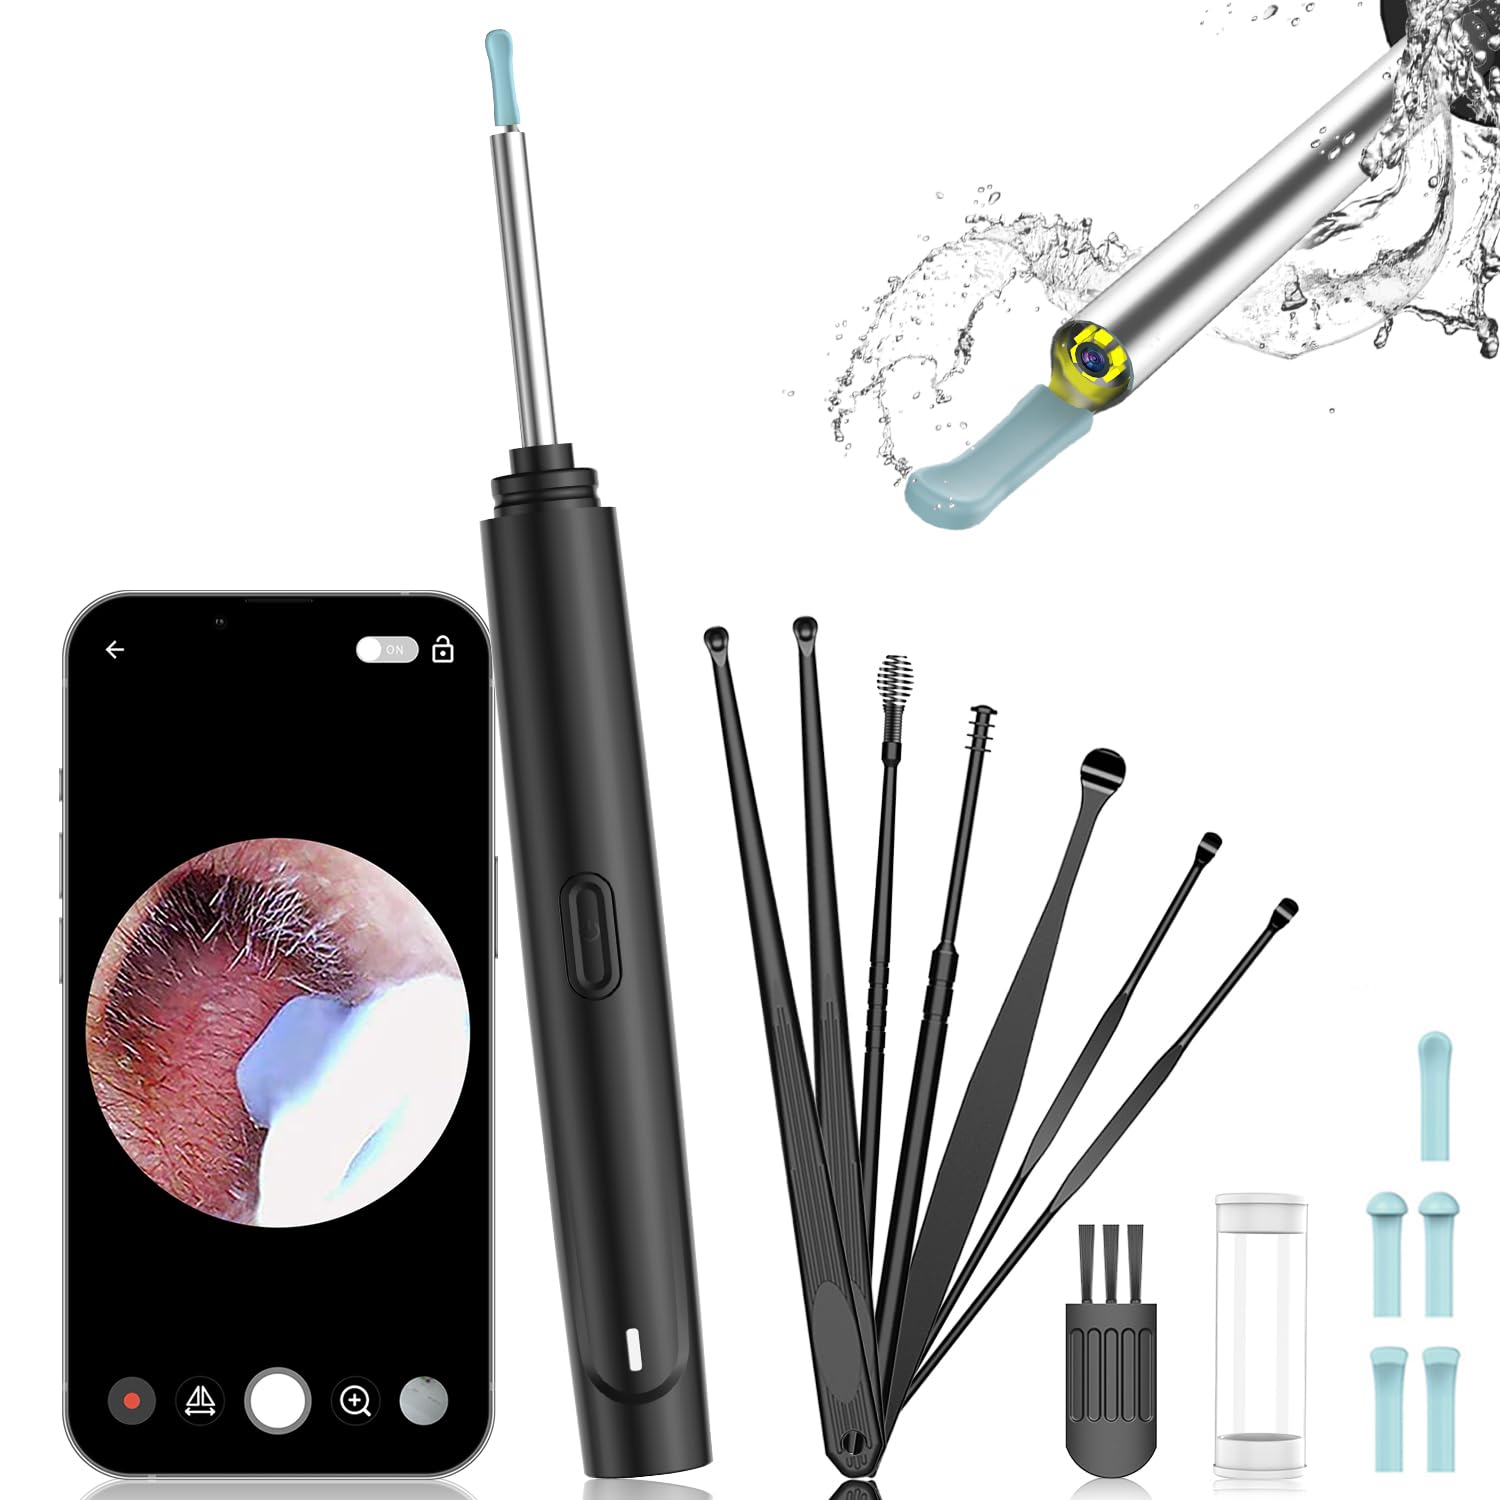 Aabld P1 Pro Ear Wax Removal Tool, Wireless Endoscope Otoscope Camera 1080P  FHD with 6 LED Lights, S - Ear Care - Galloway, New Jersey, Facebook  Marketplace